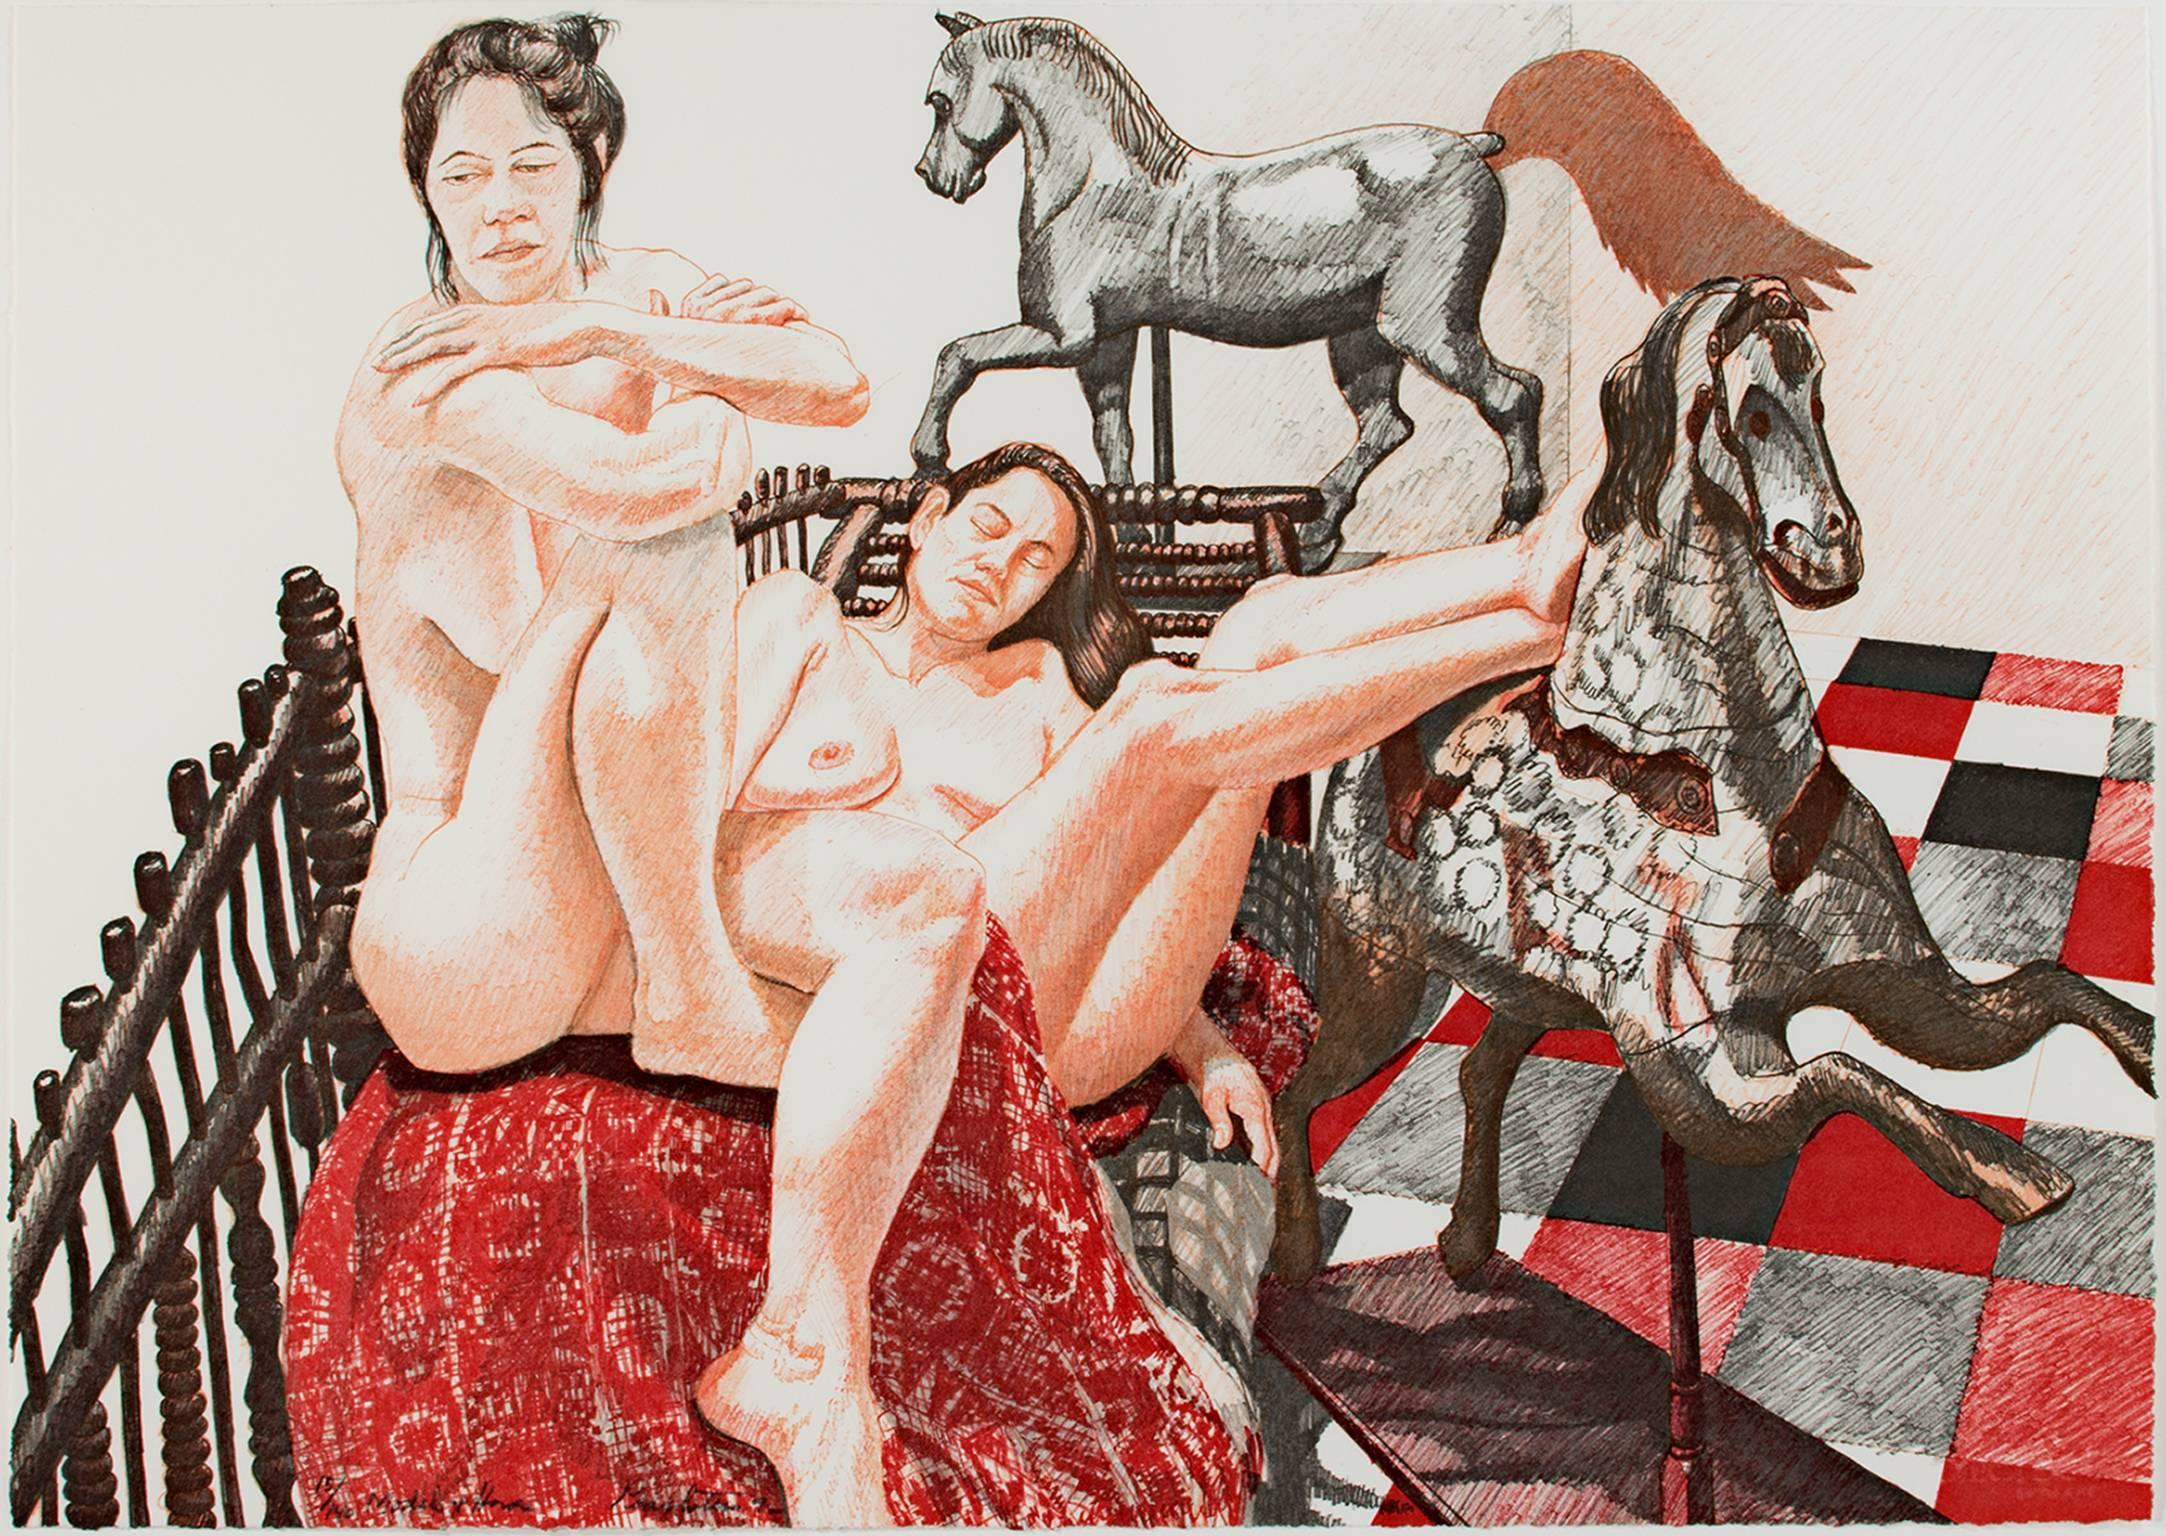 "Models & Horses, " Original Color Lithograph signed by Philip Pearlstein